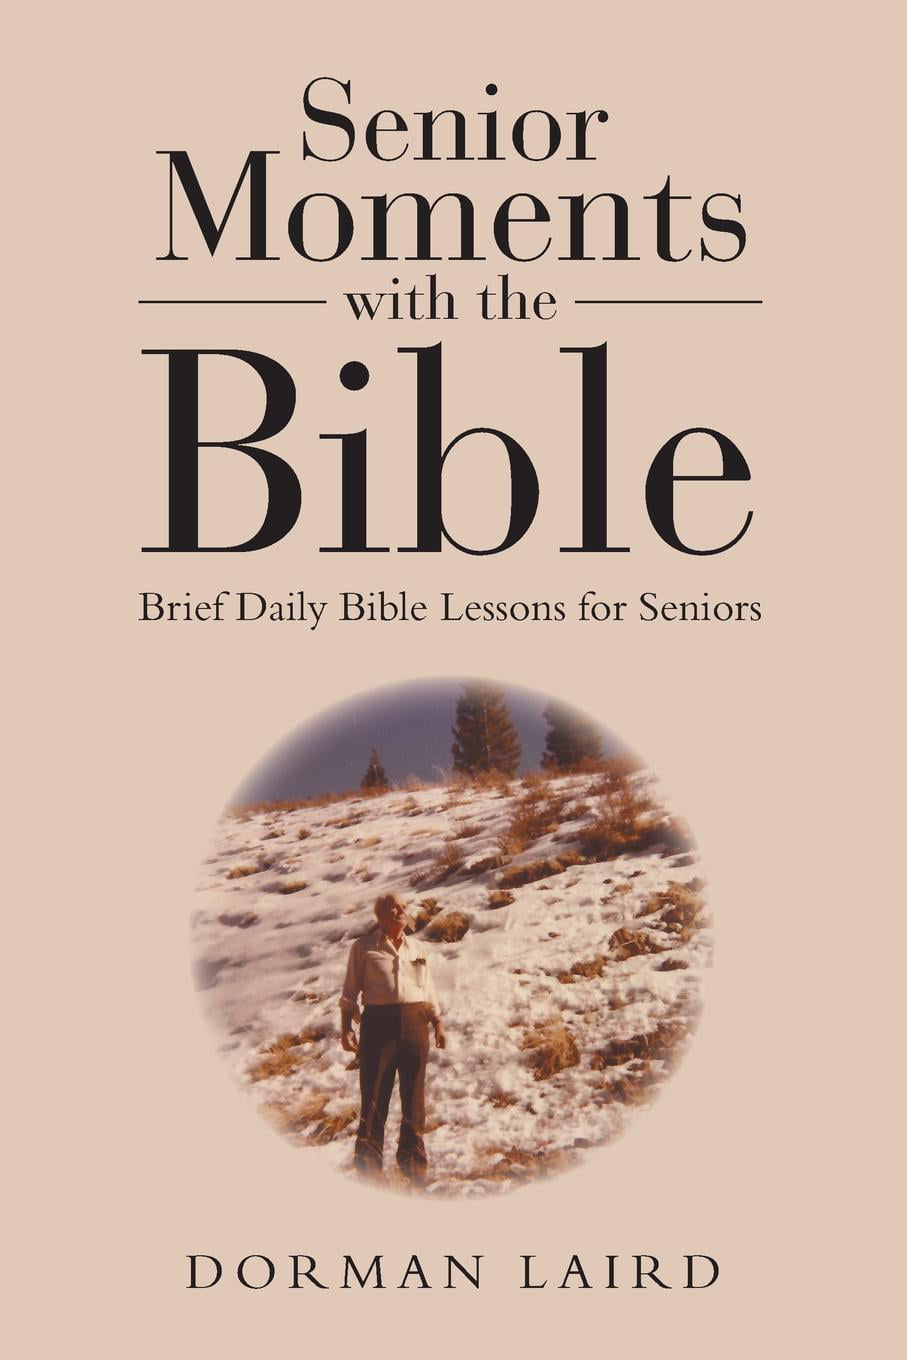 senior-moments-with-the-bible-brief-daily-bible-lessons-for-seniors